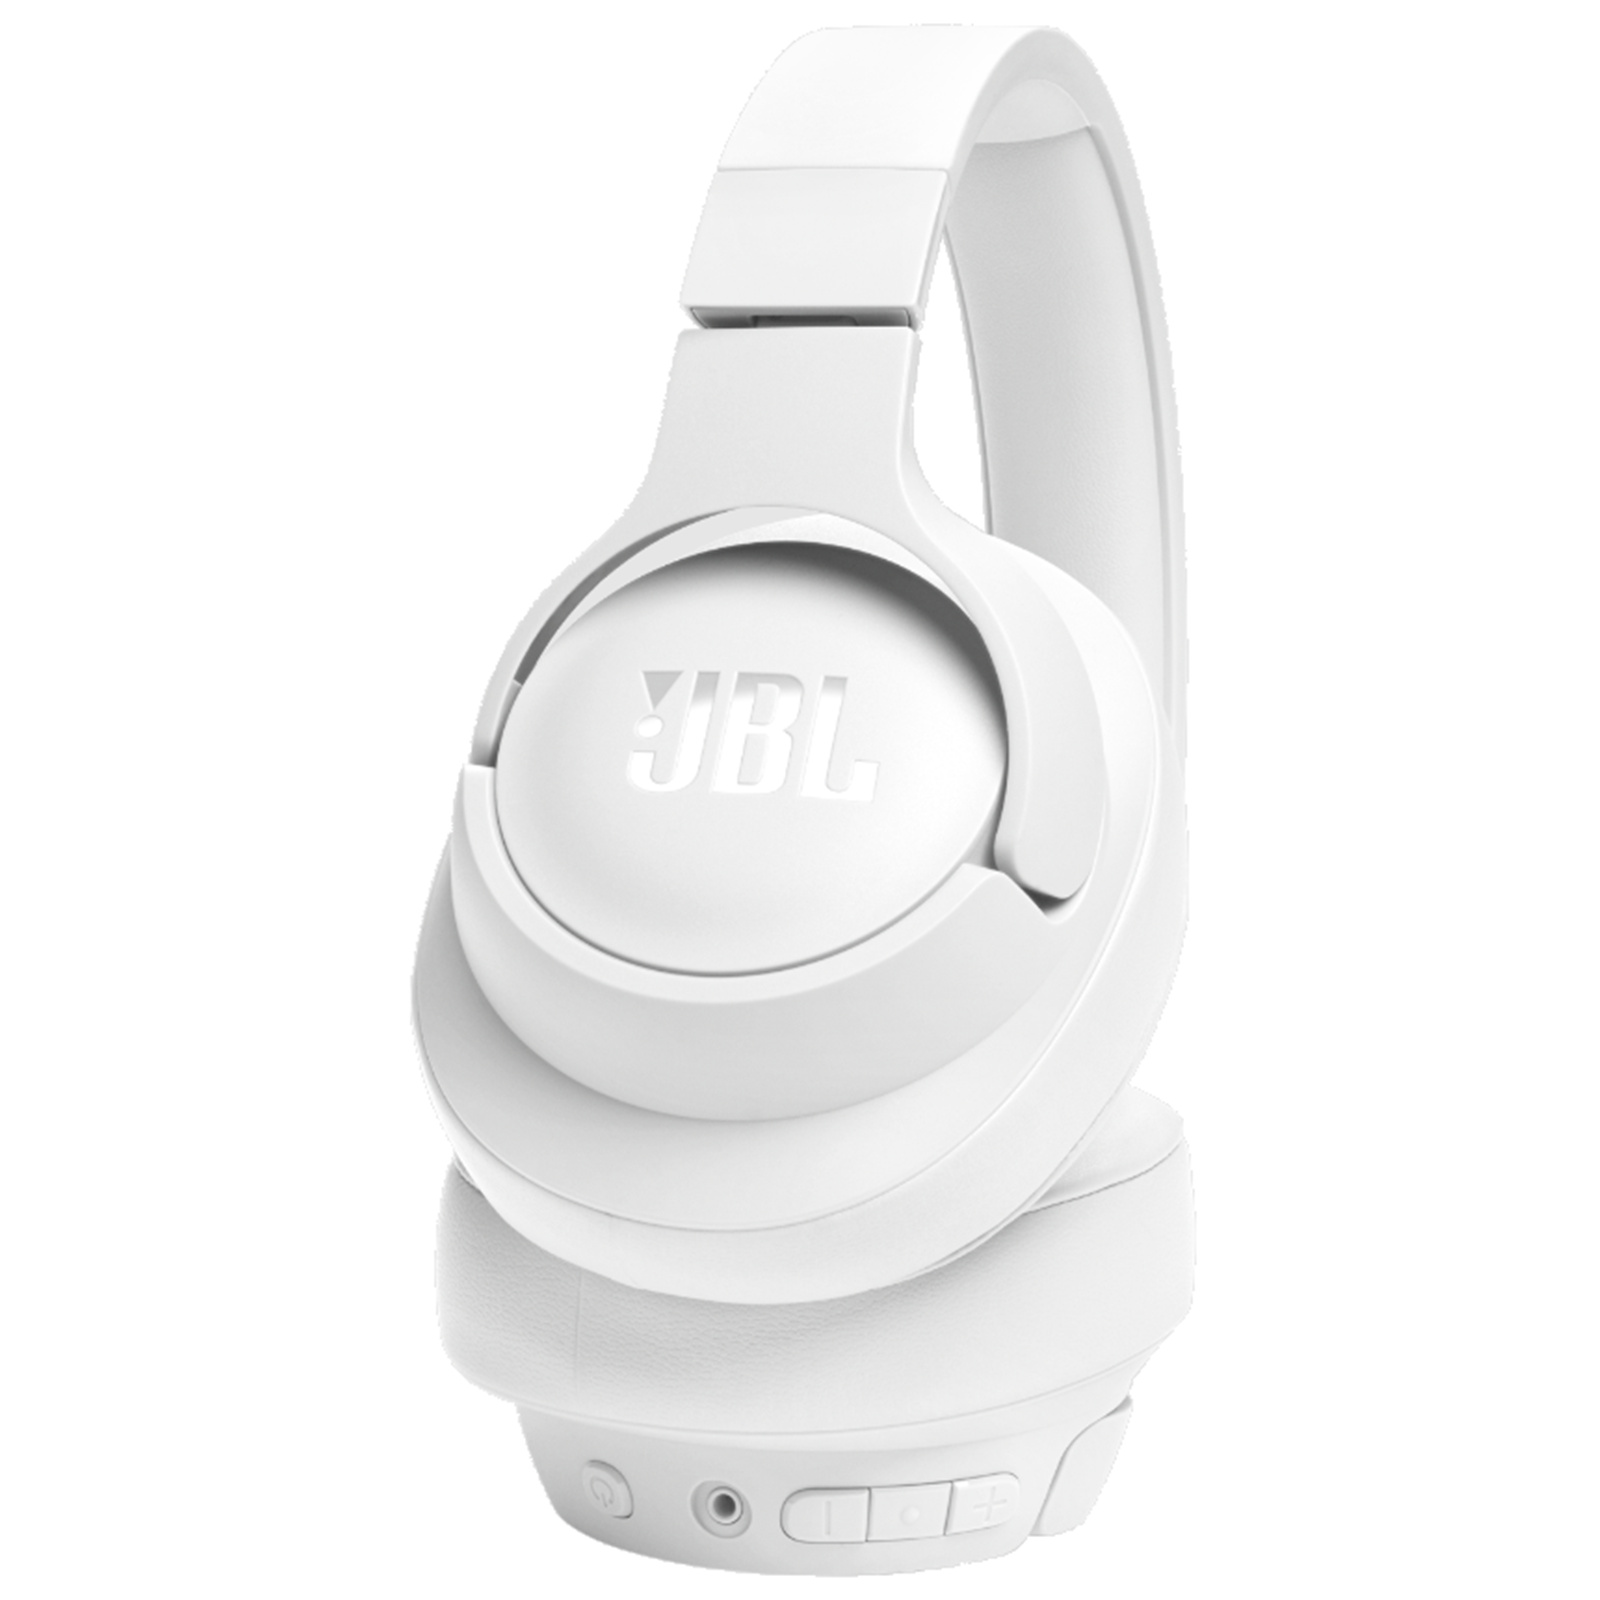 JBL Tune 720BT Wireless Over Ear Headphones with Mic, Pure Bass